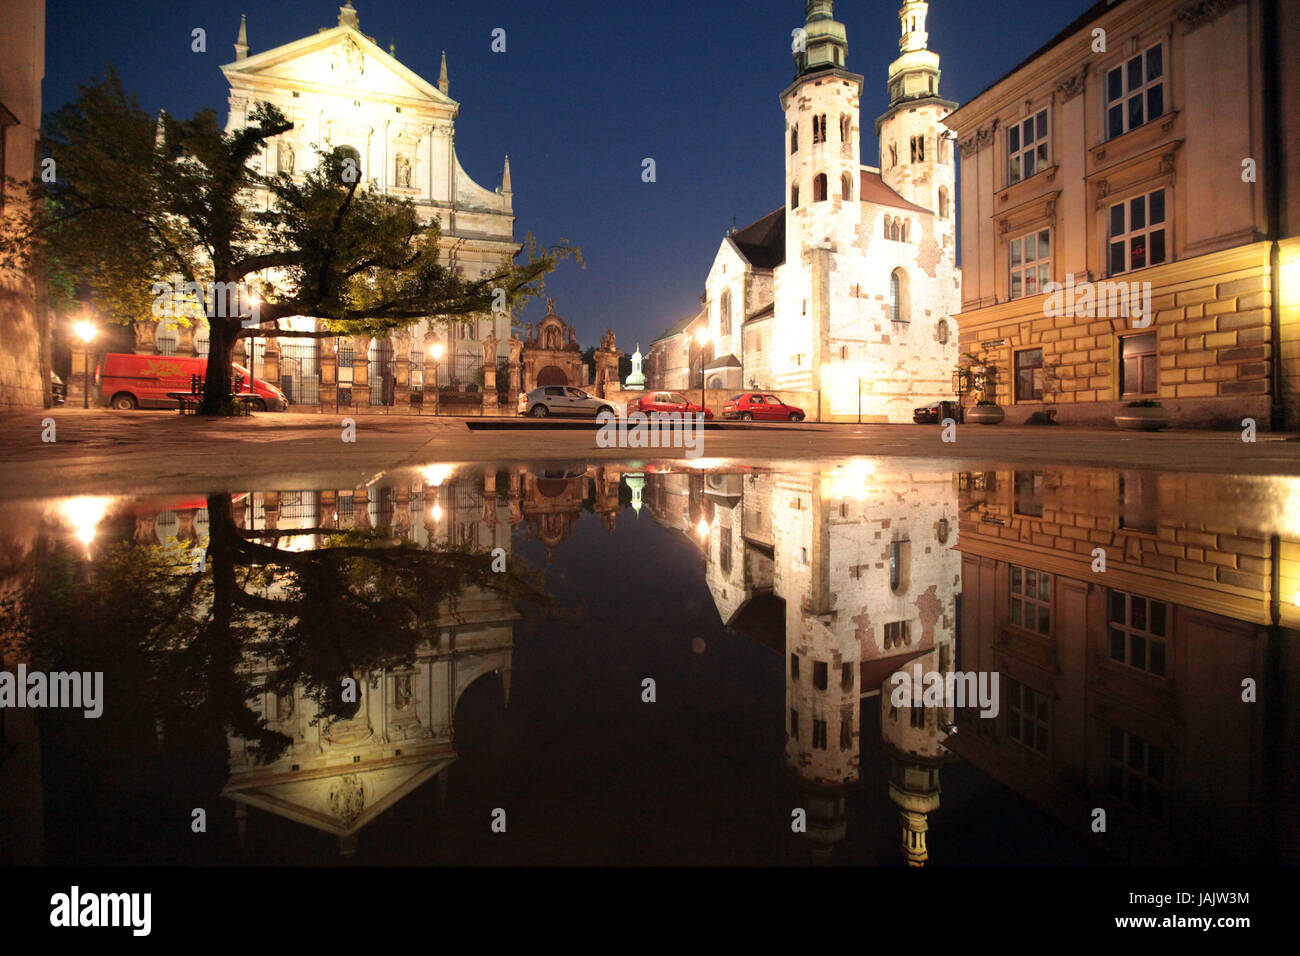 Poland,Cracow,small Pole,Old Town,everyday life,Plac Sw Marii Magdaleny,church,Peter and Paul Kirche,Andreas's church, Stock Photo